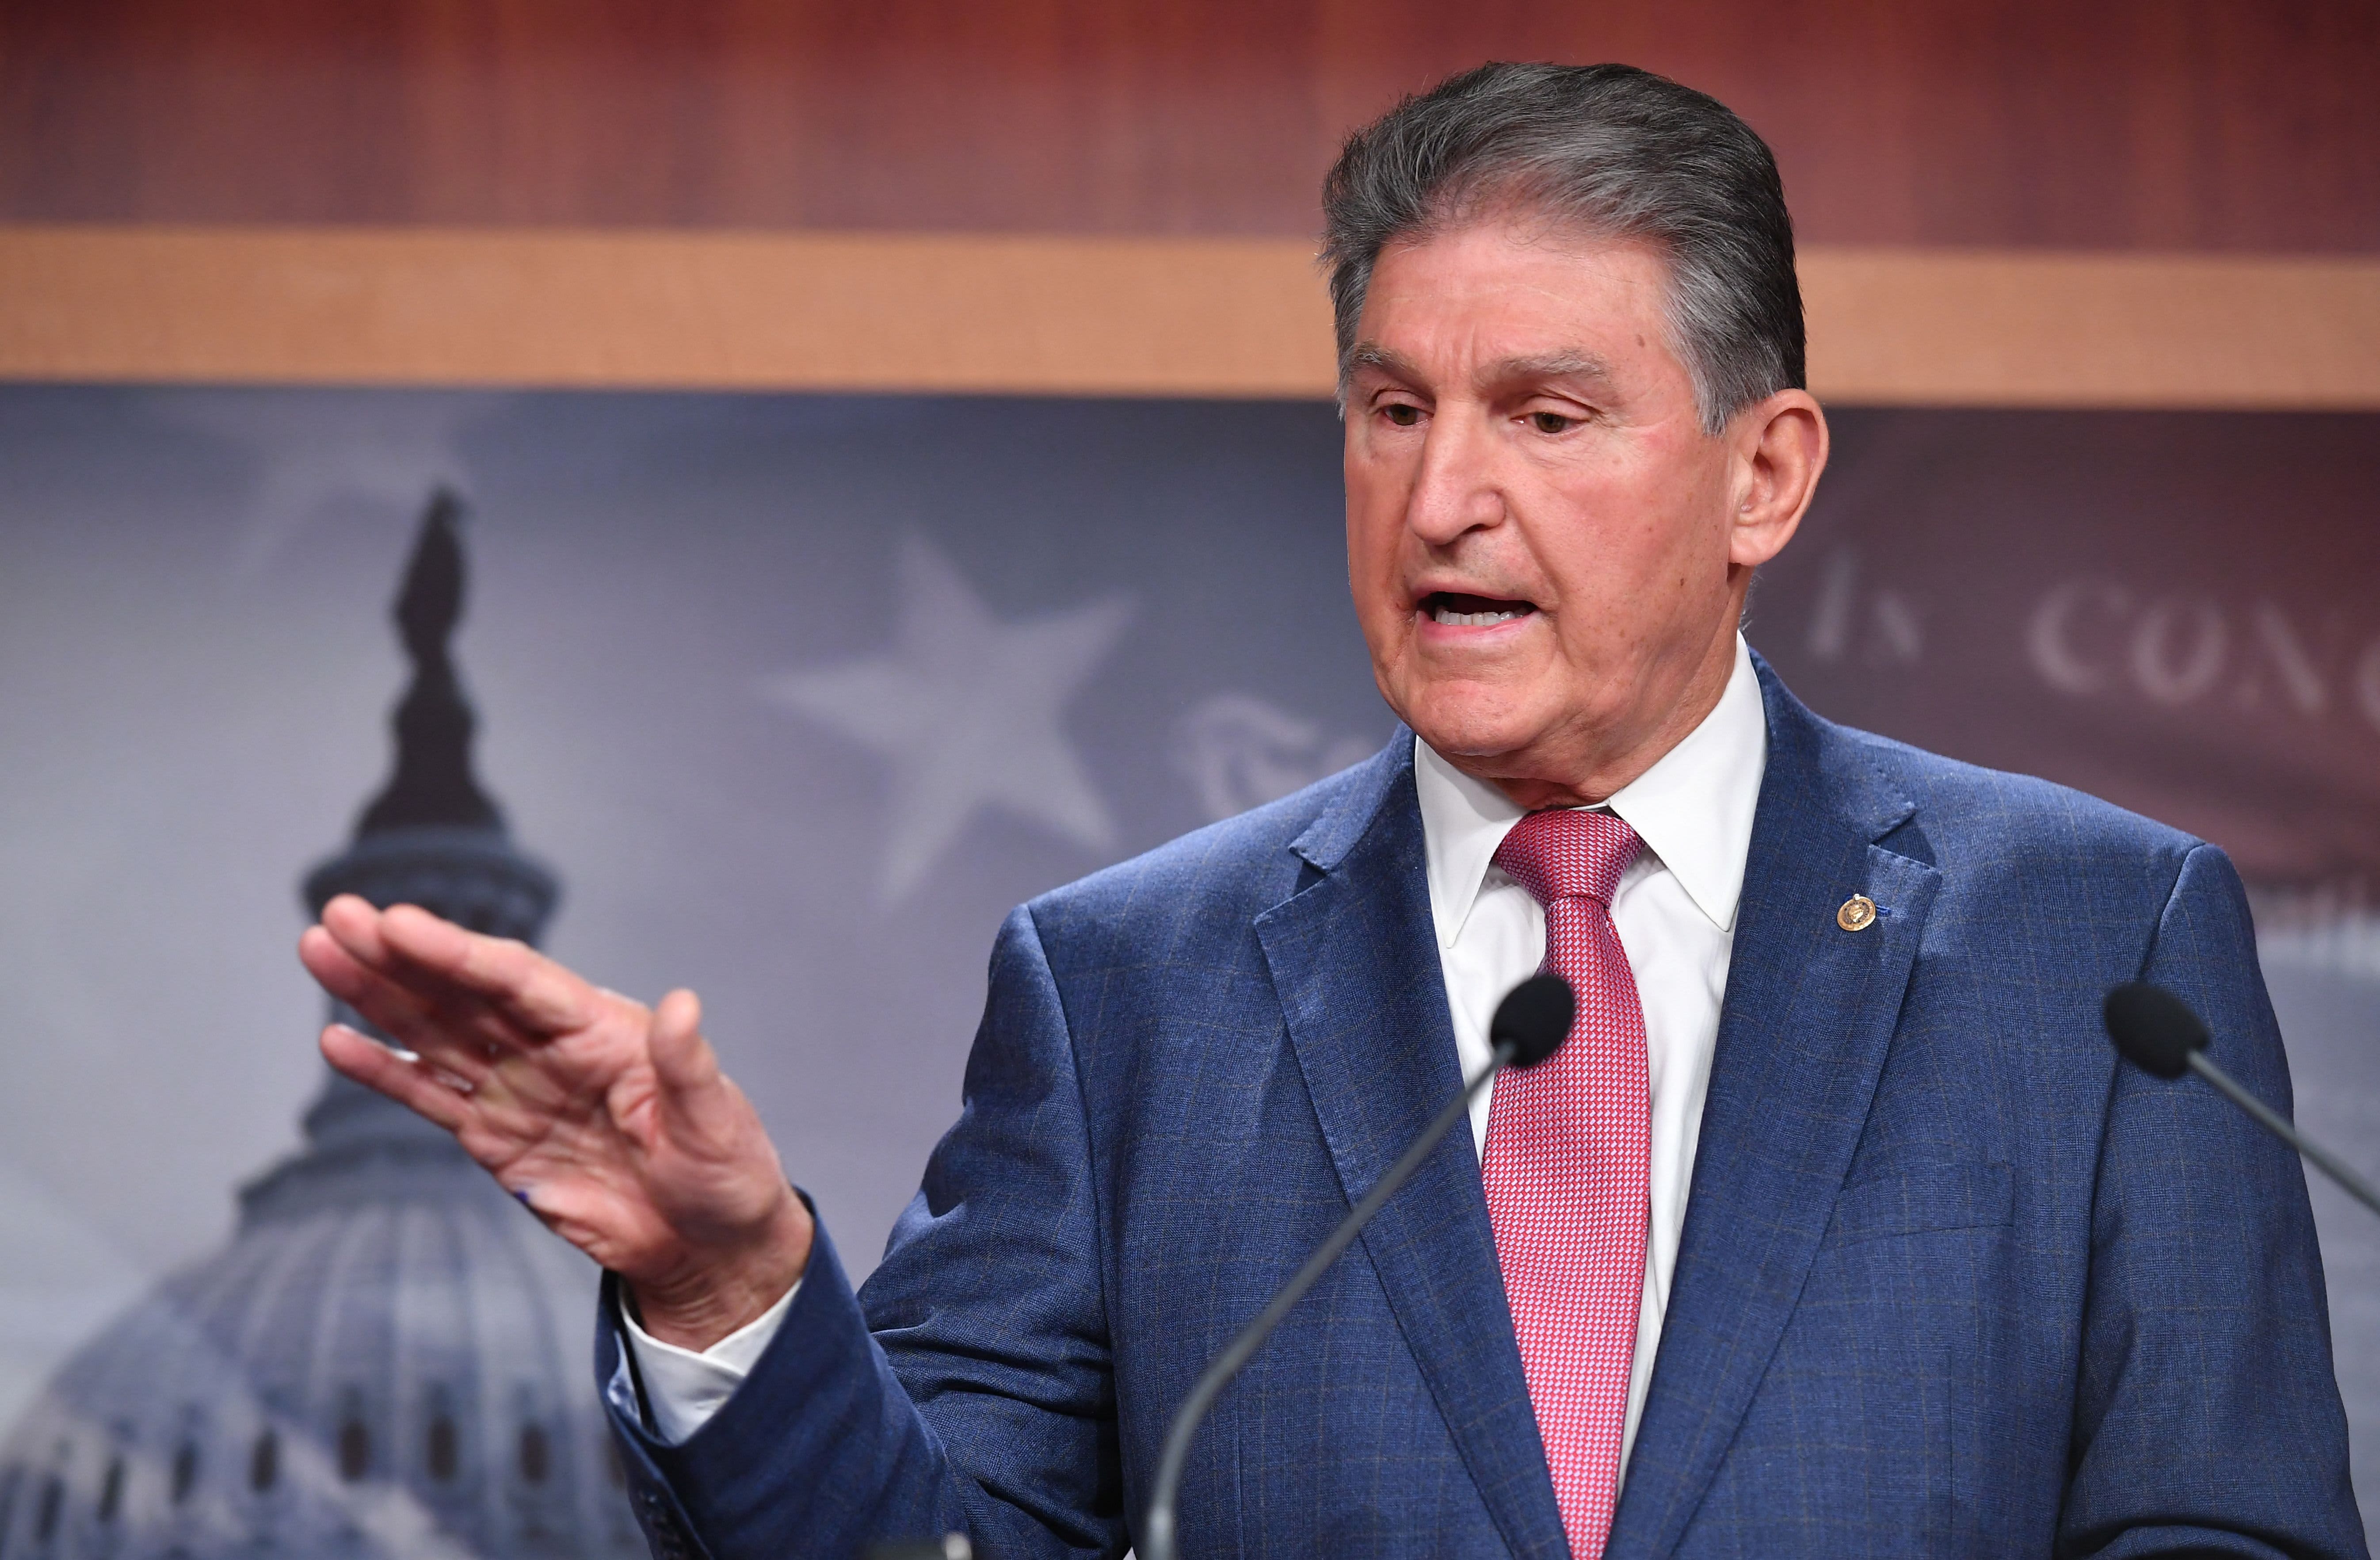 Manchin stalls progress on Biden’s social safety net and climate plan as House works to finalize bill – CNBC